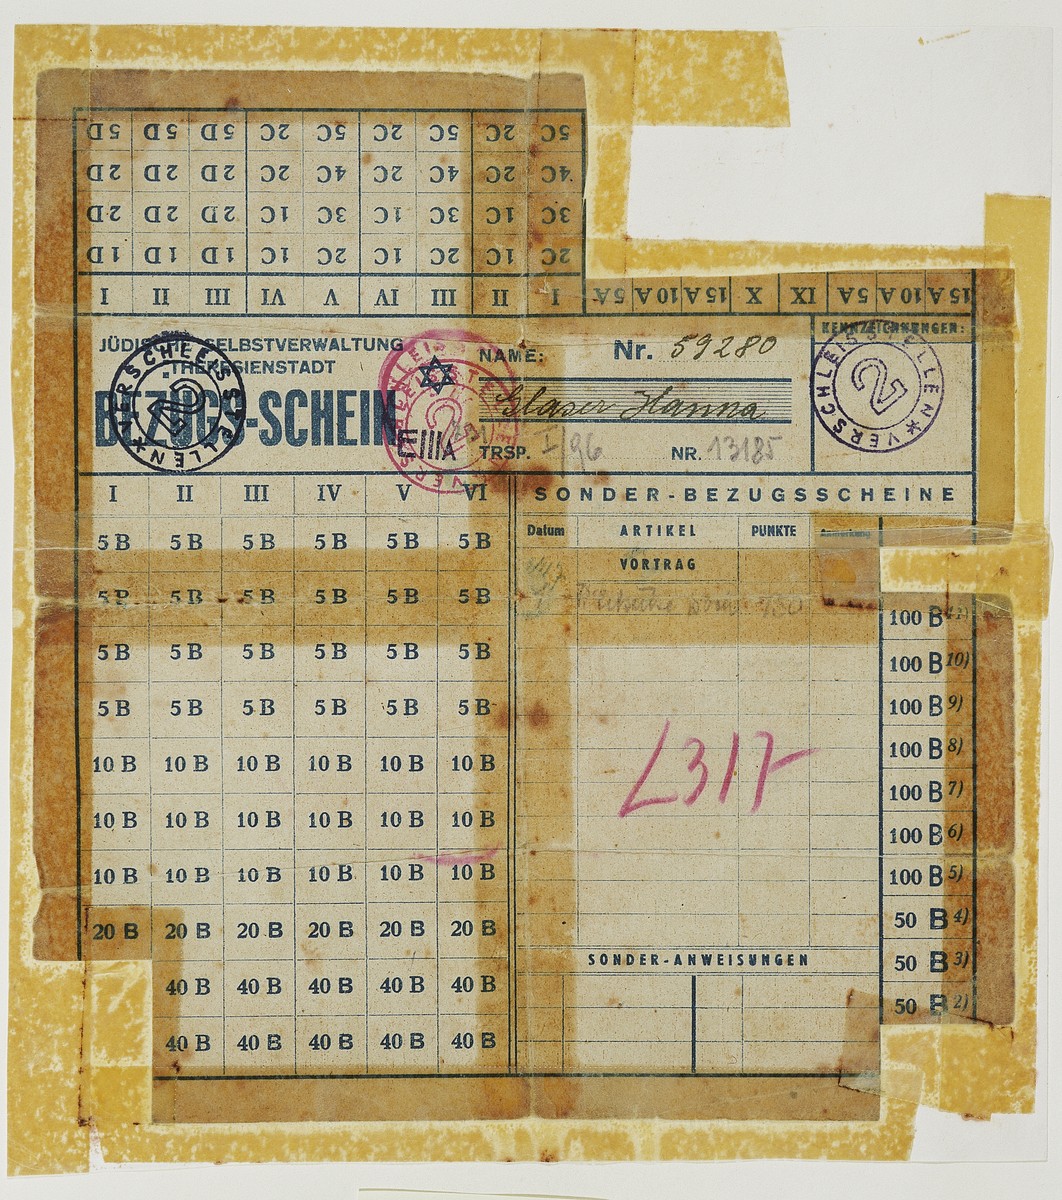 Ration card issued in the Theresienstadt concentration camp.

According to the donor, these cards were given out to mislead the Red Cross into believing that there were commodoties available for purchase.